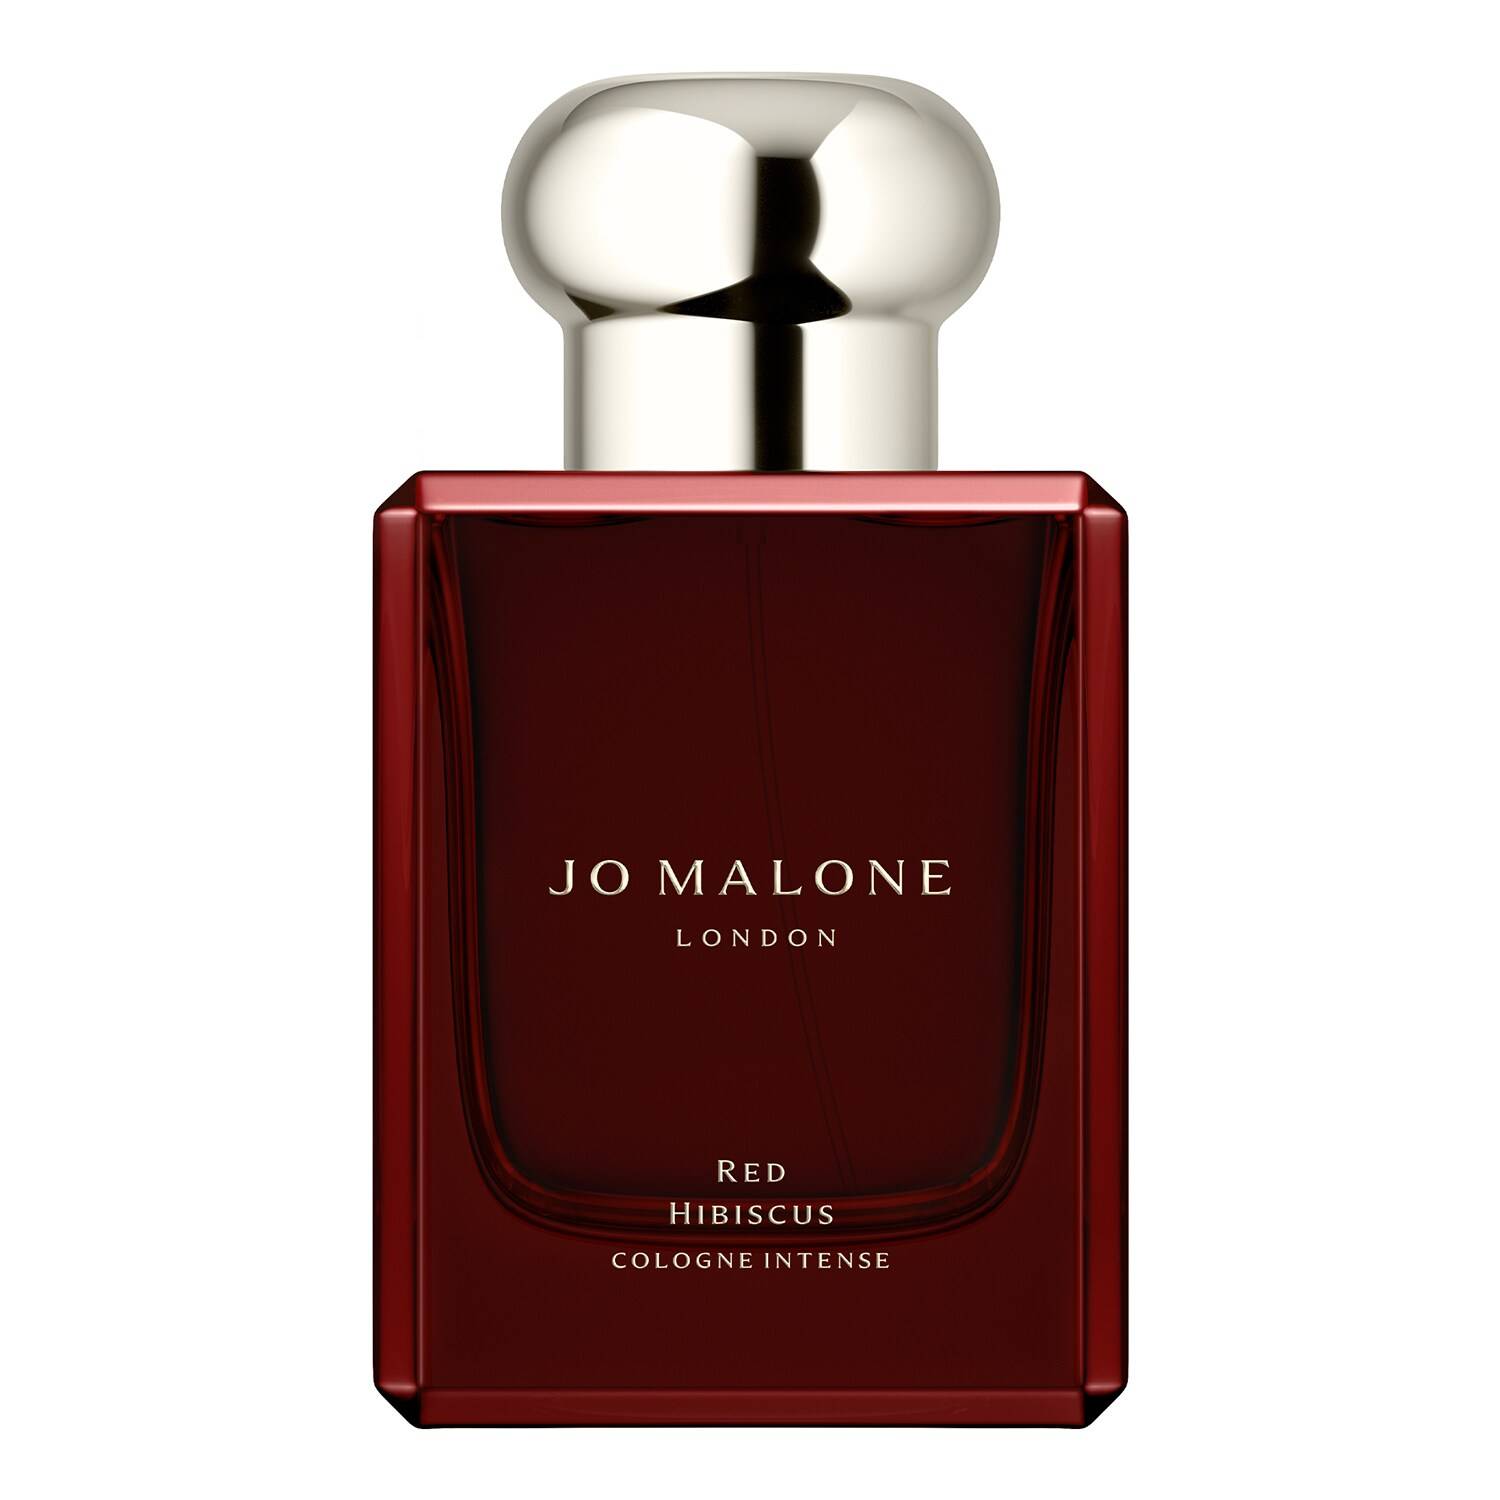 Jo Malone London Red Hibiscus Cologne Intense 50Ml